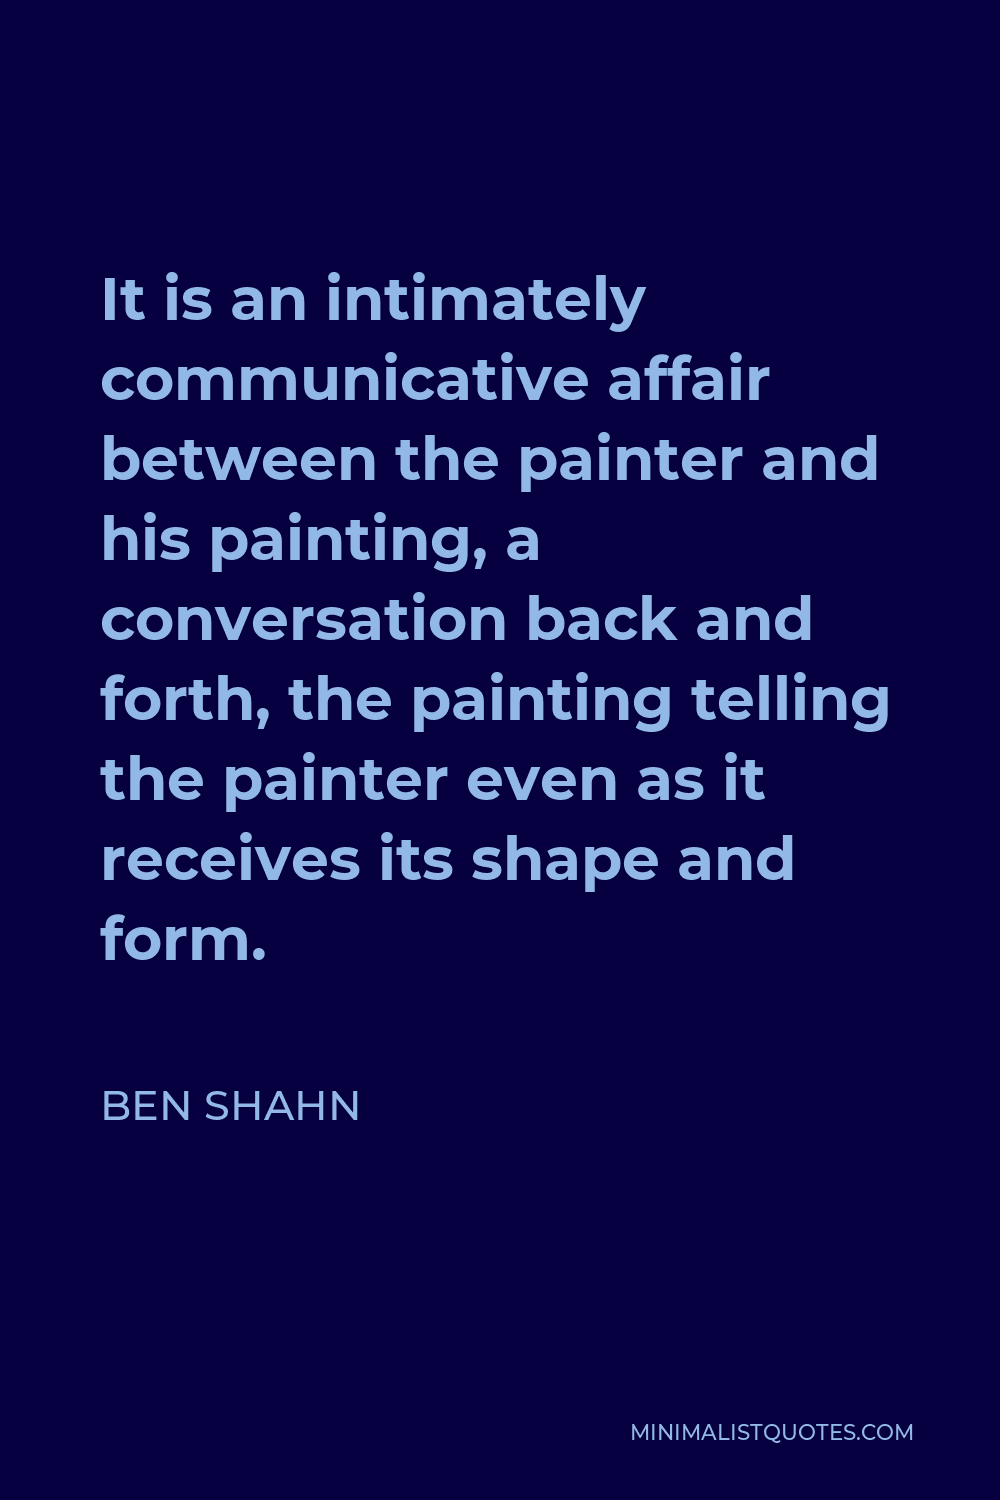 Ben Shahn Quote - It is an intimately communicative affair between the painter and his painting, a conversation back and forth, the painting telling the painter even as it receives its shape and form.